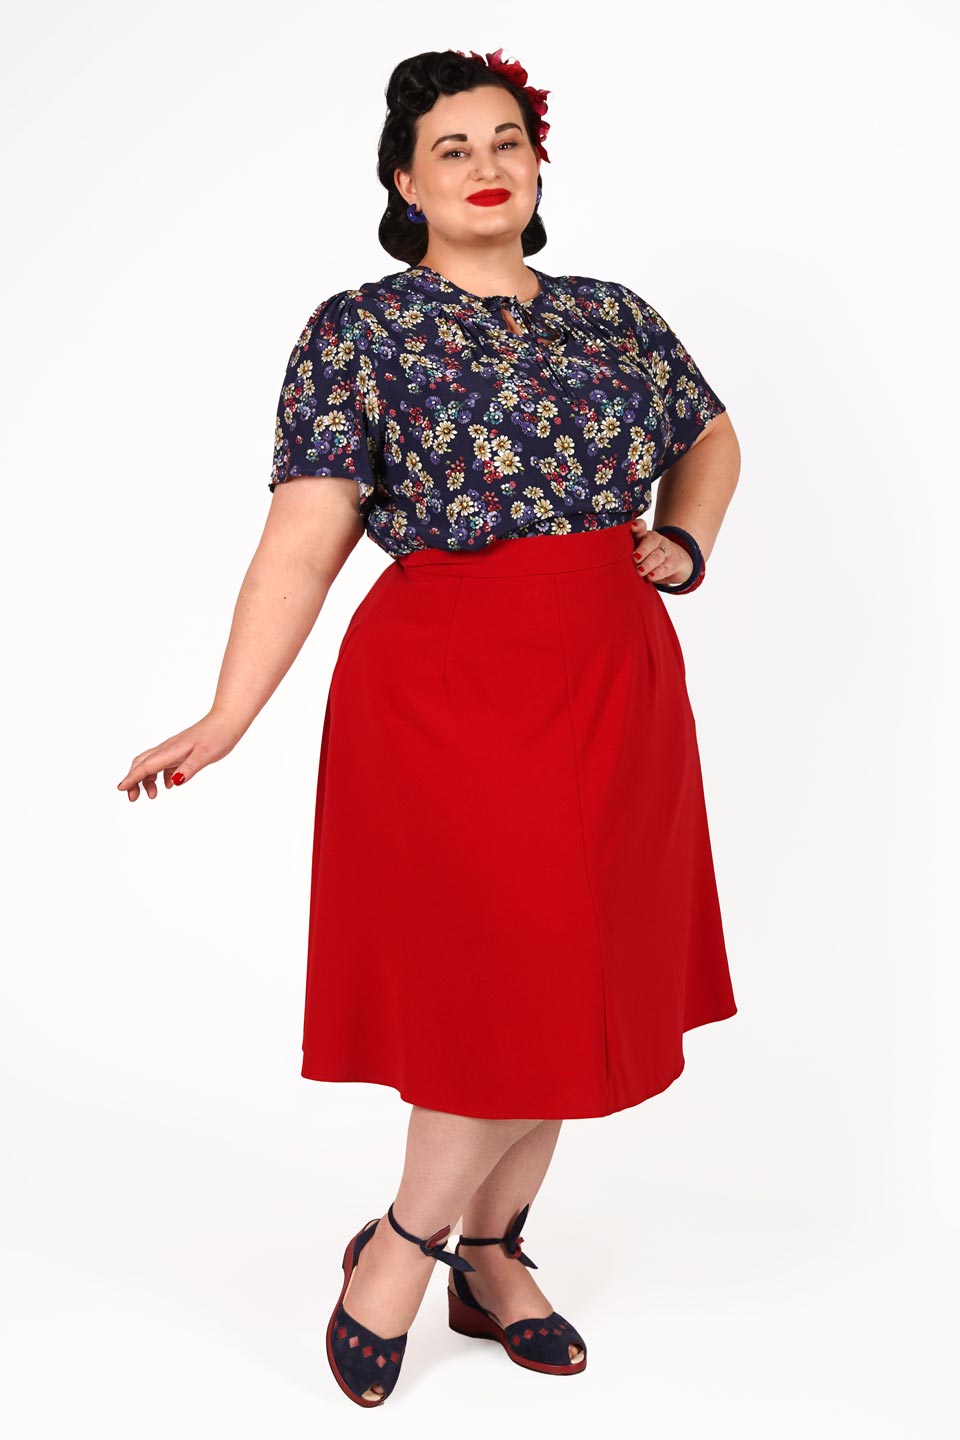 Classic 1940s Style A-Line Skirt in Red